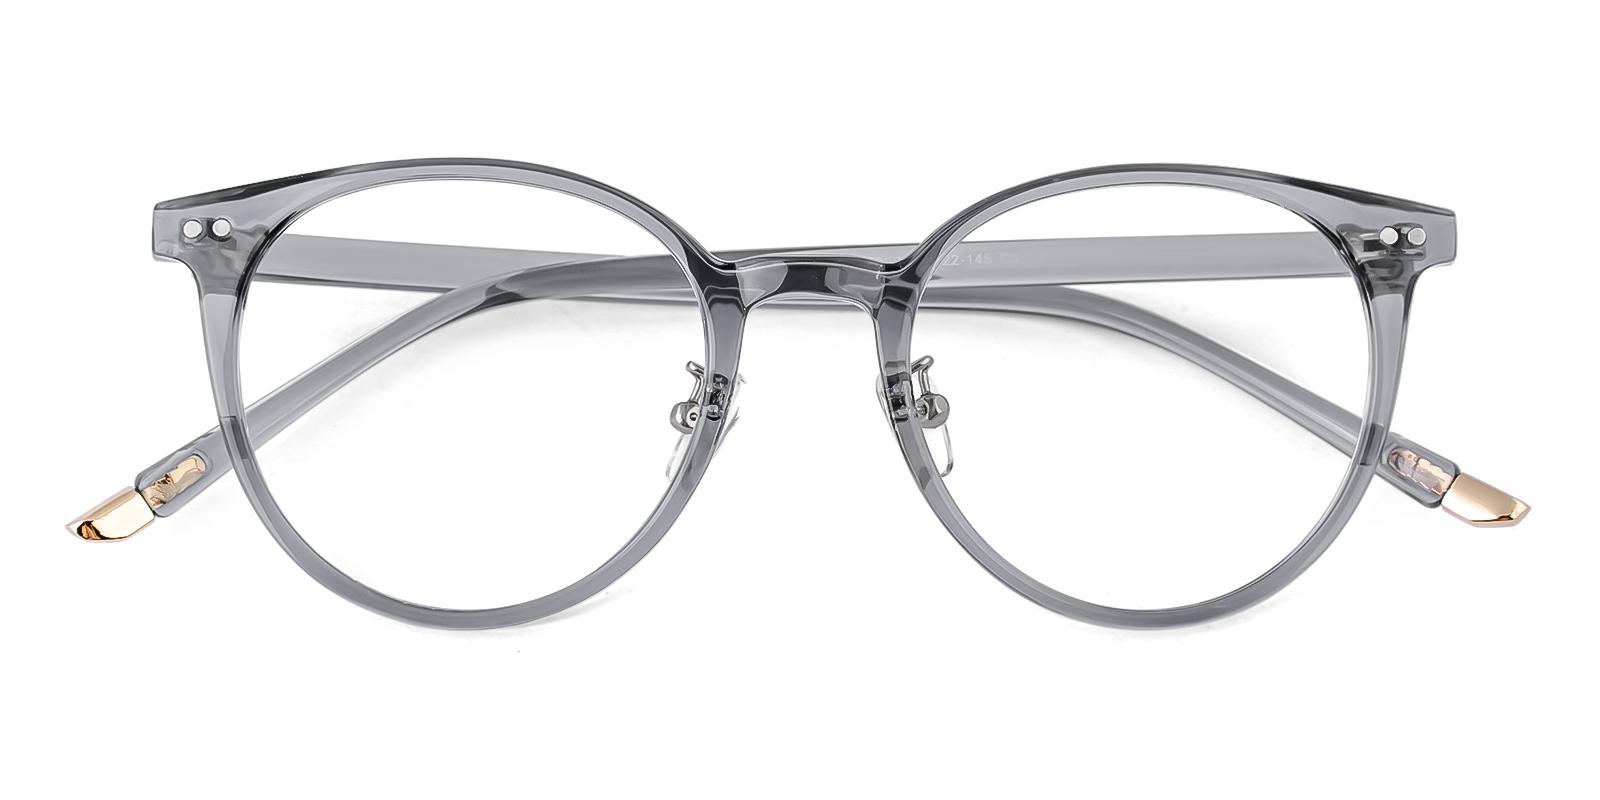 Candeous Gray Plastic Eyeglasses , NosePads Frames from ABBE Glasses